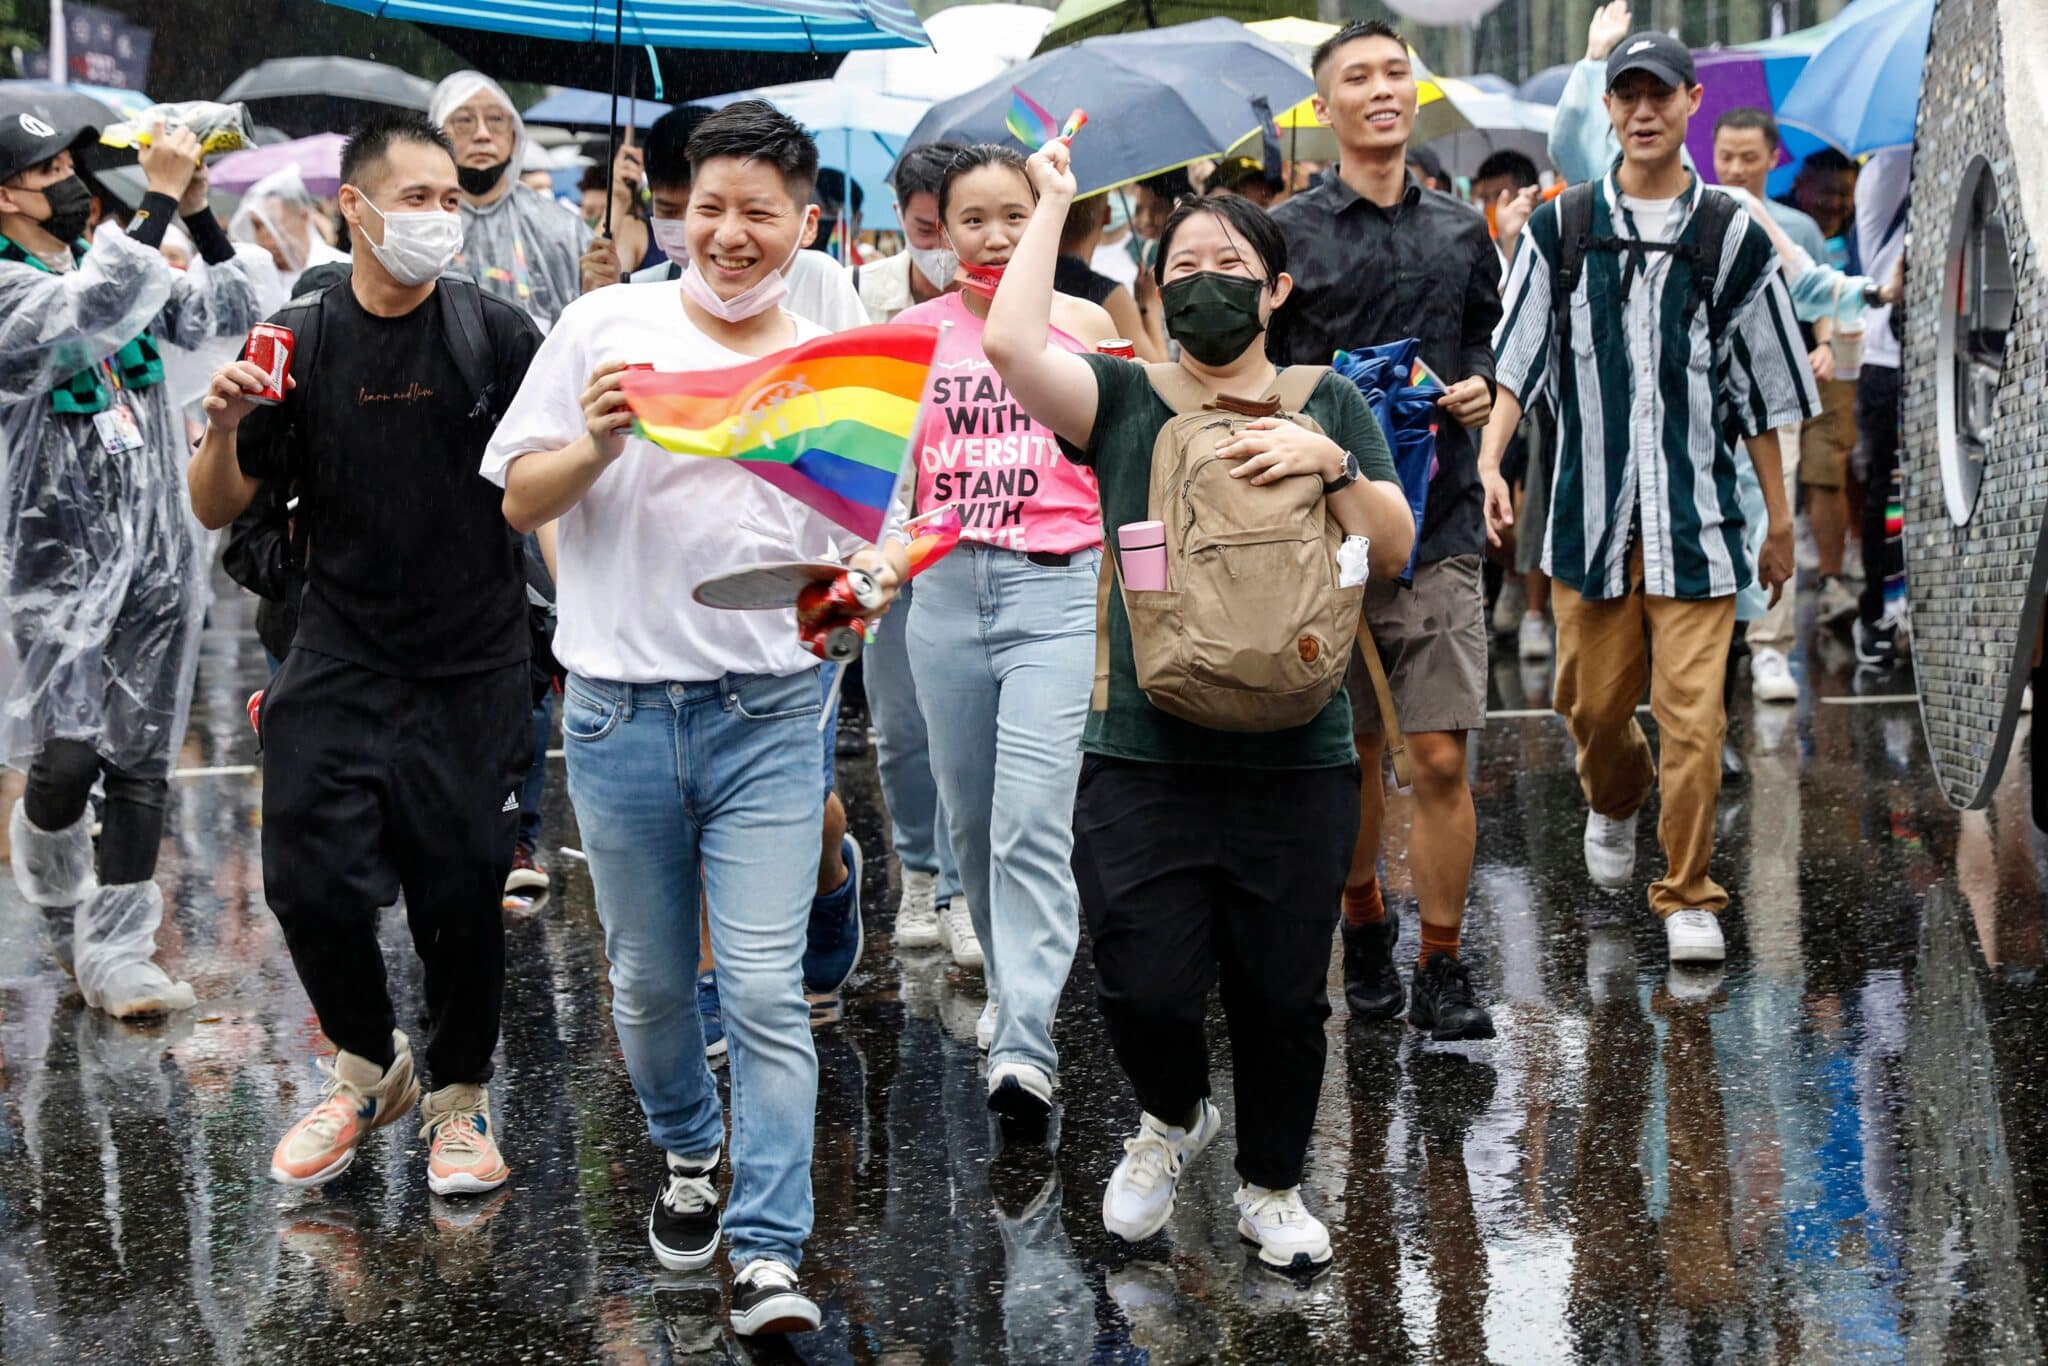 LGBTQ+ activists take part in the Pride Parade in Taipei, Taiwan on 29 October 2022